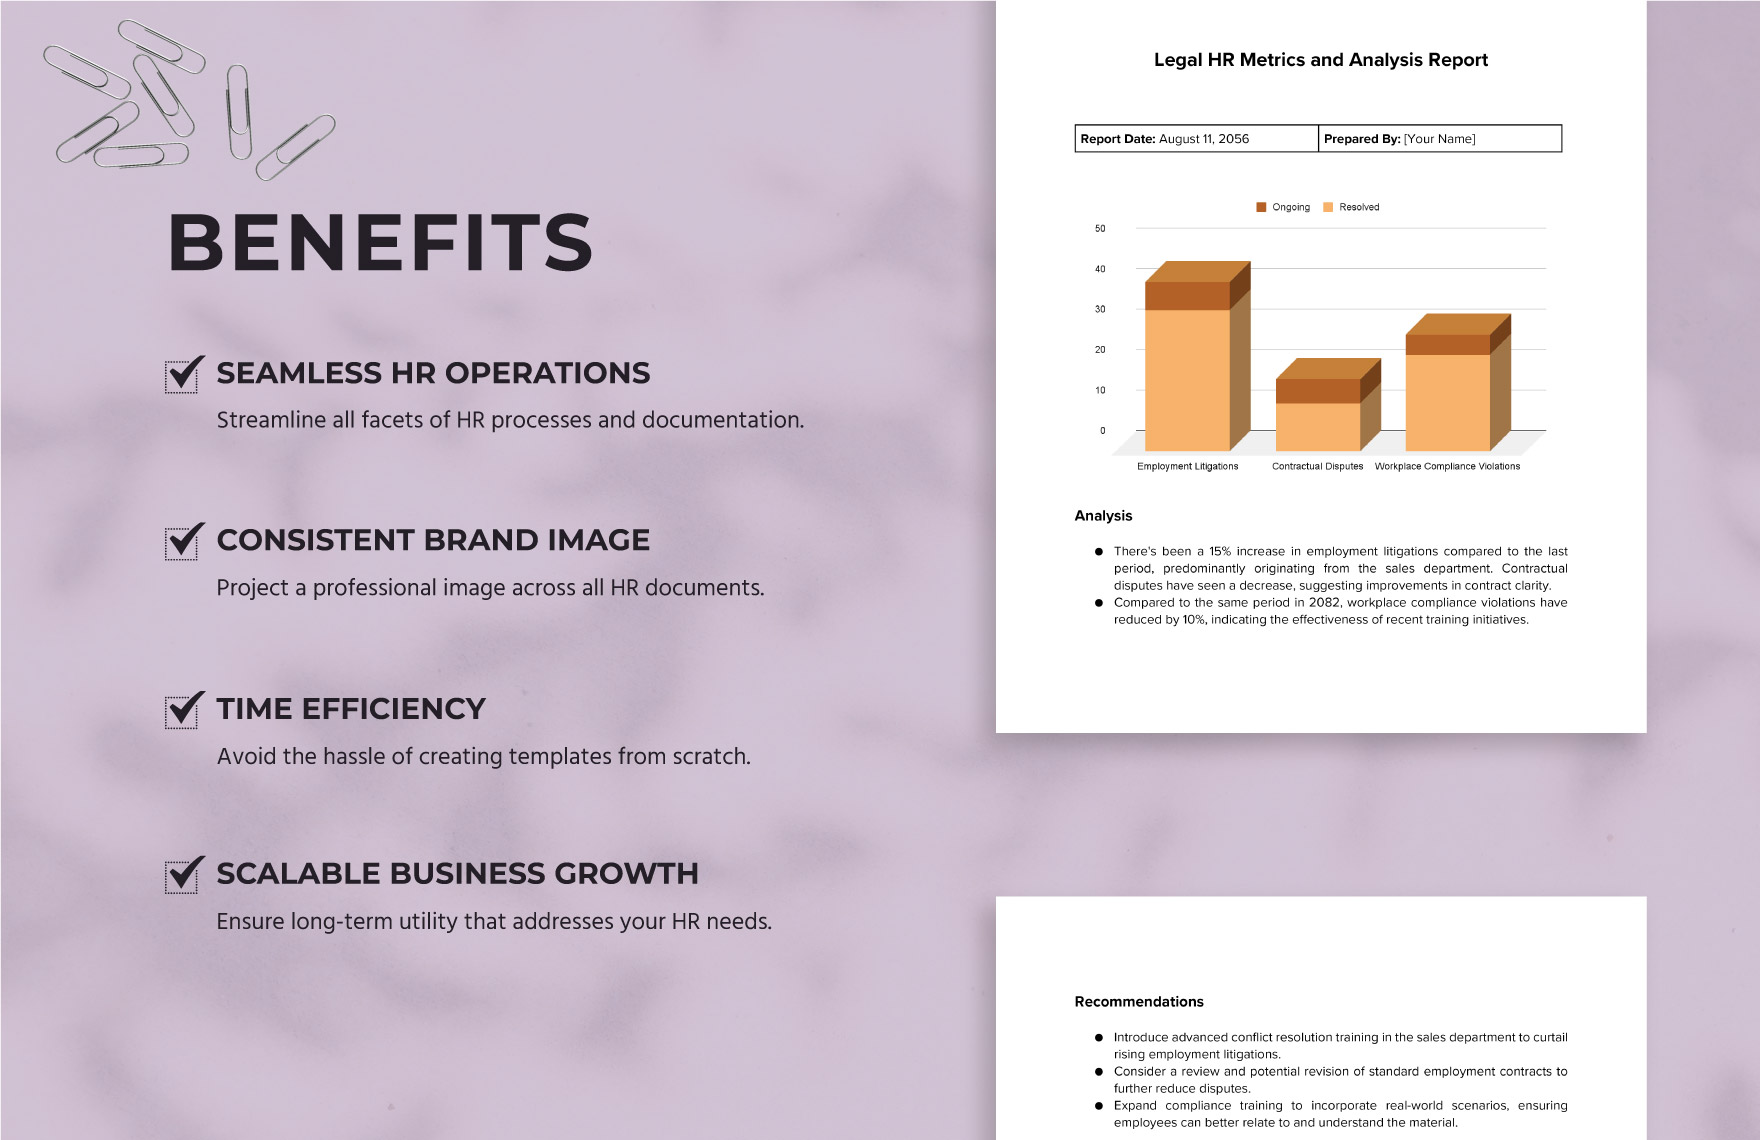 Legal HR Metrics and Analysis Report Template in Word PDF Google Docs